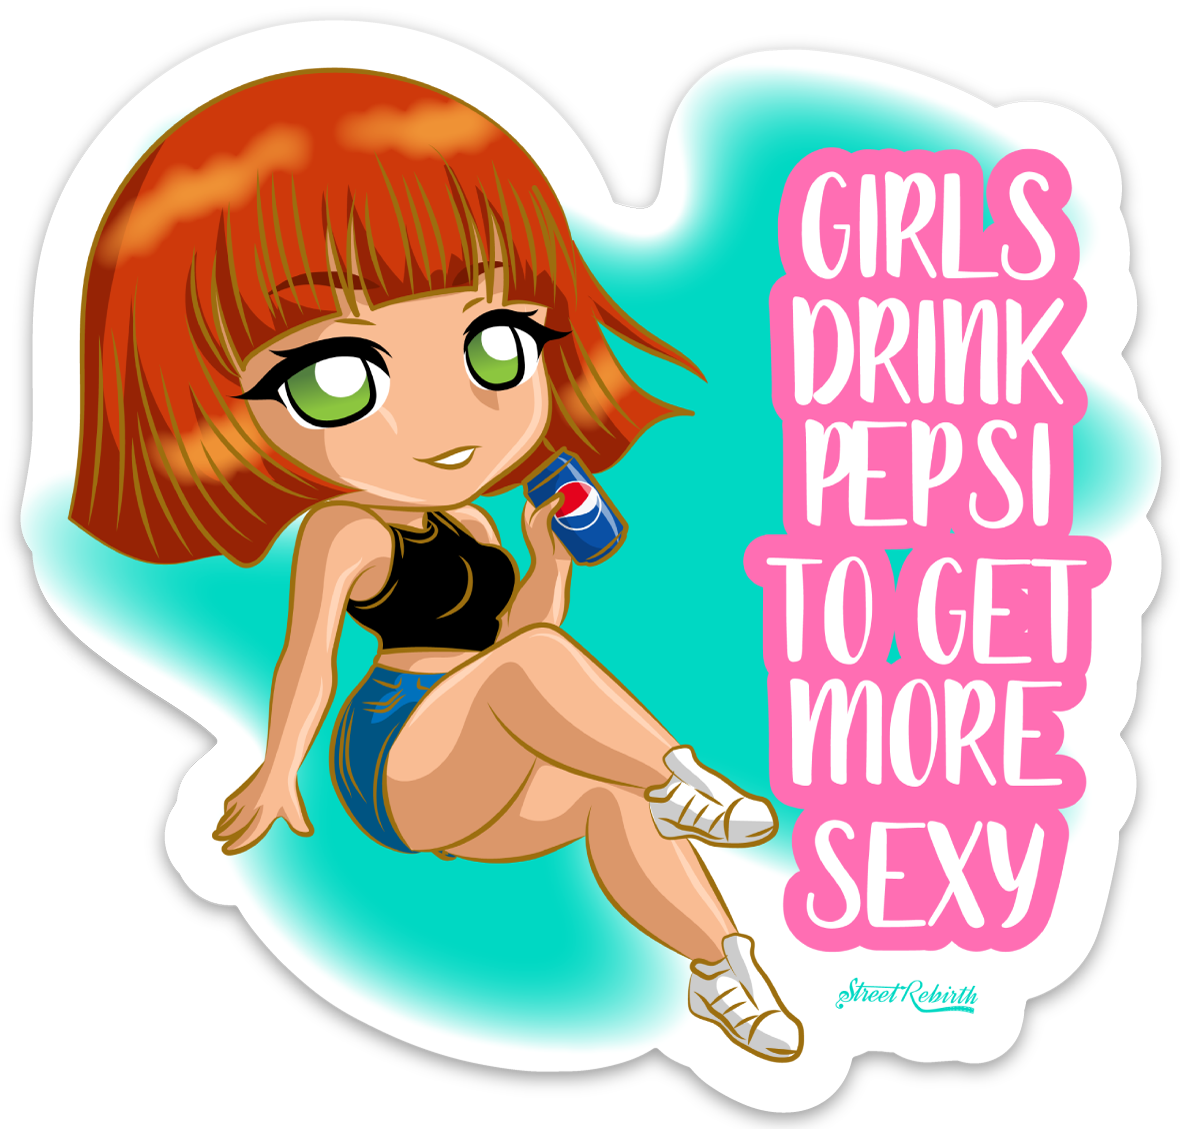 GIRLS DRINK PEPSI TO GET MORE SEXY PUN STICKER – ONE 4 INCH WATER PROOF VINYL STICKER – FOR HYDRO FLASK, SKATEBOARD, LAPTOP, PLANNER, CAR, COLLECTING, GIFTING